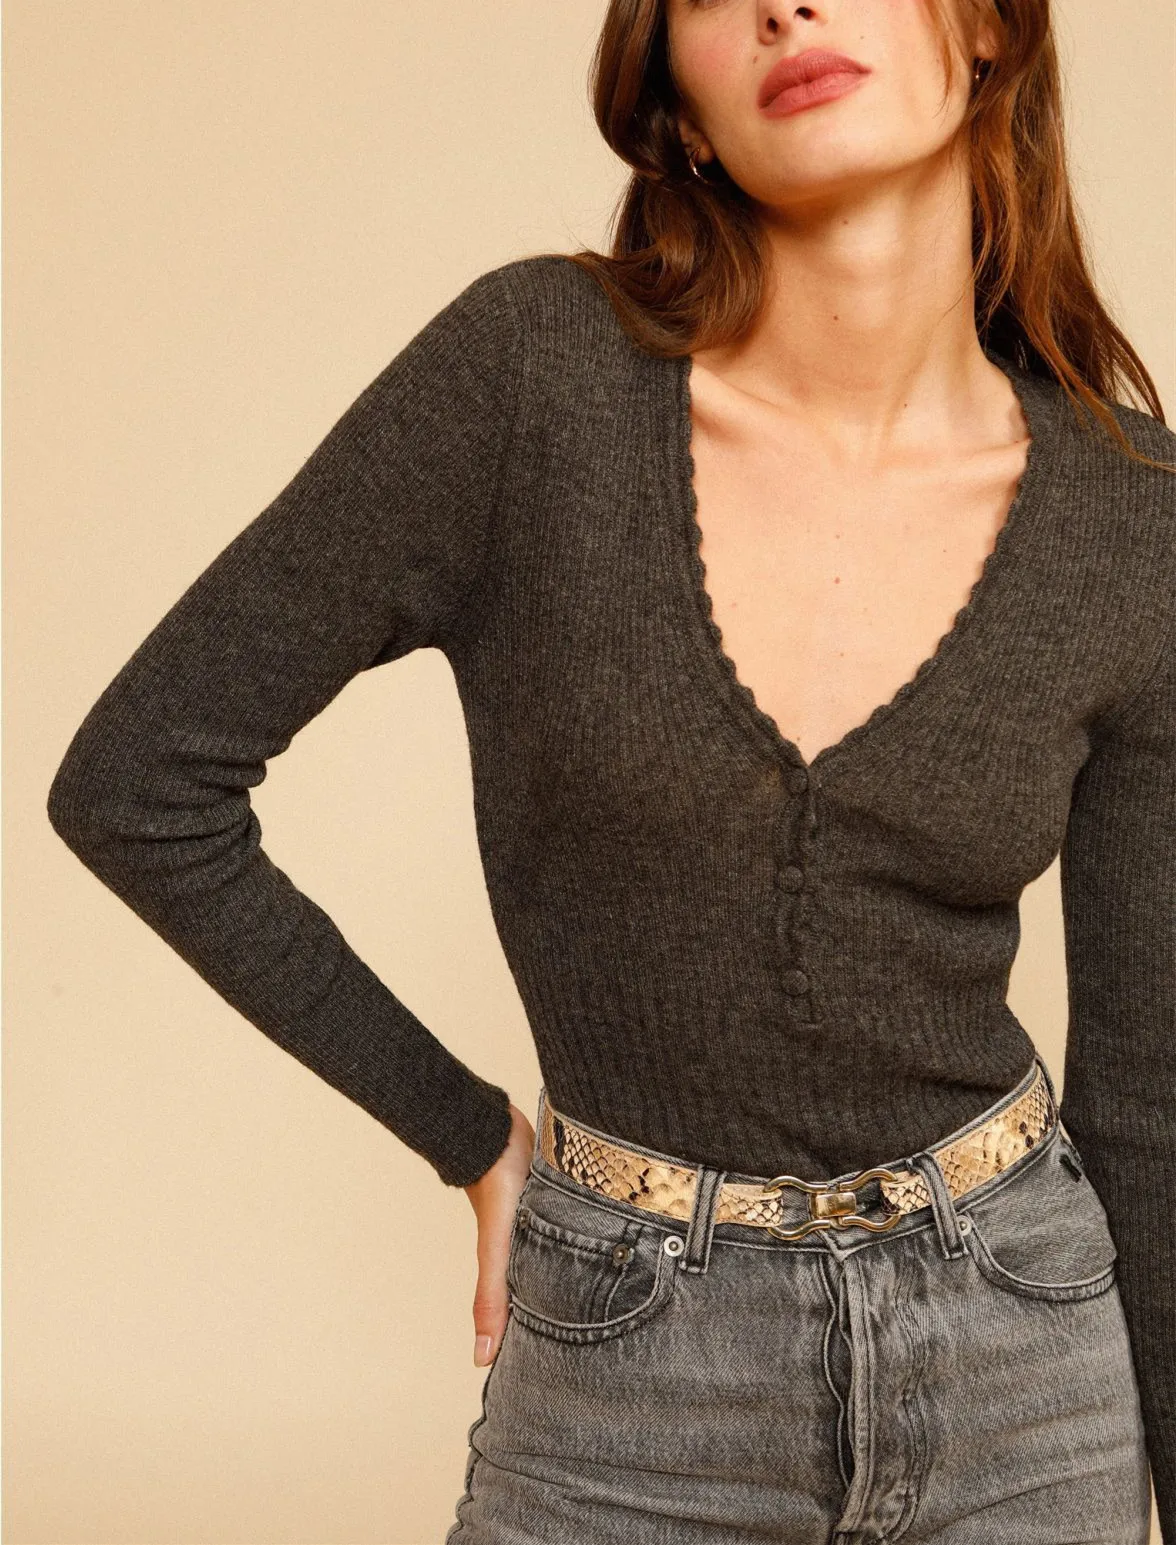 

Wavy Trim V-neck Women Knit Slim Sweater 2021 Autumn Winter Lady Long-Sleeved Knitwear Bottoming Pullover Top Front With Buttons